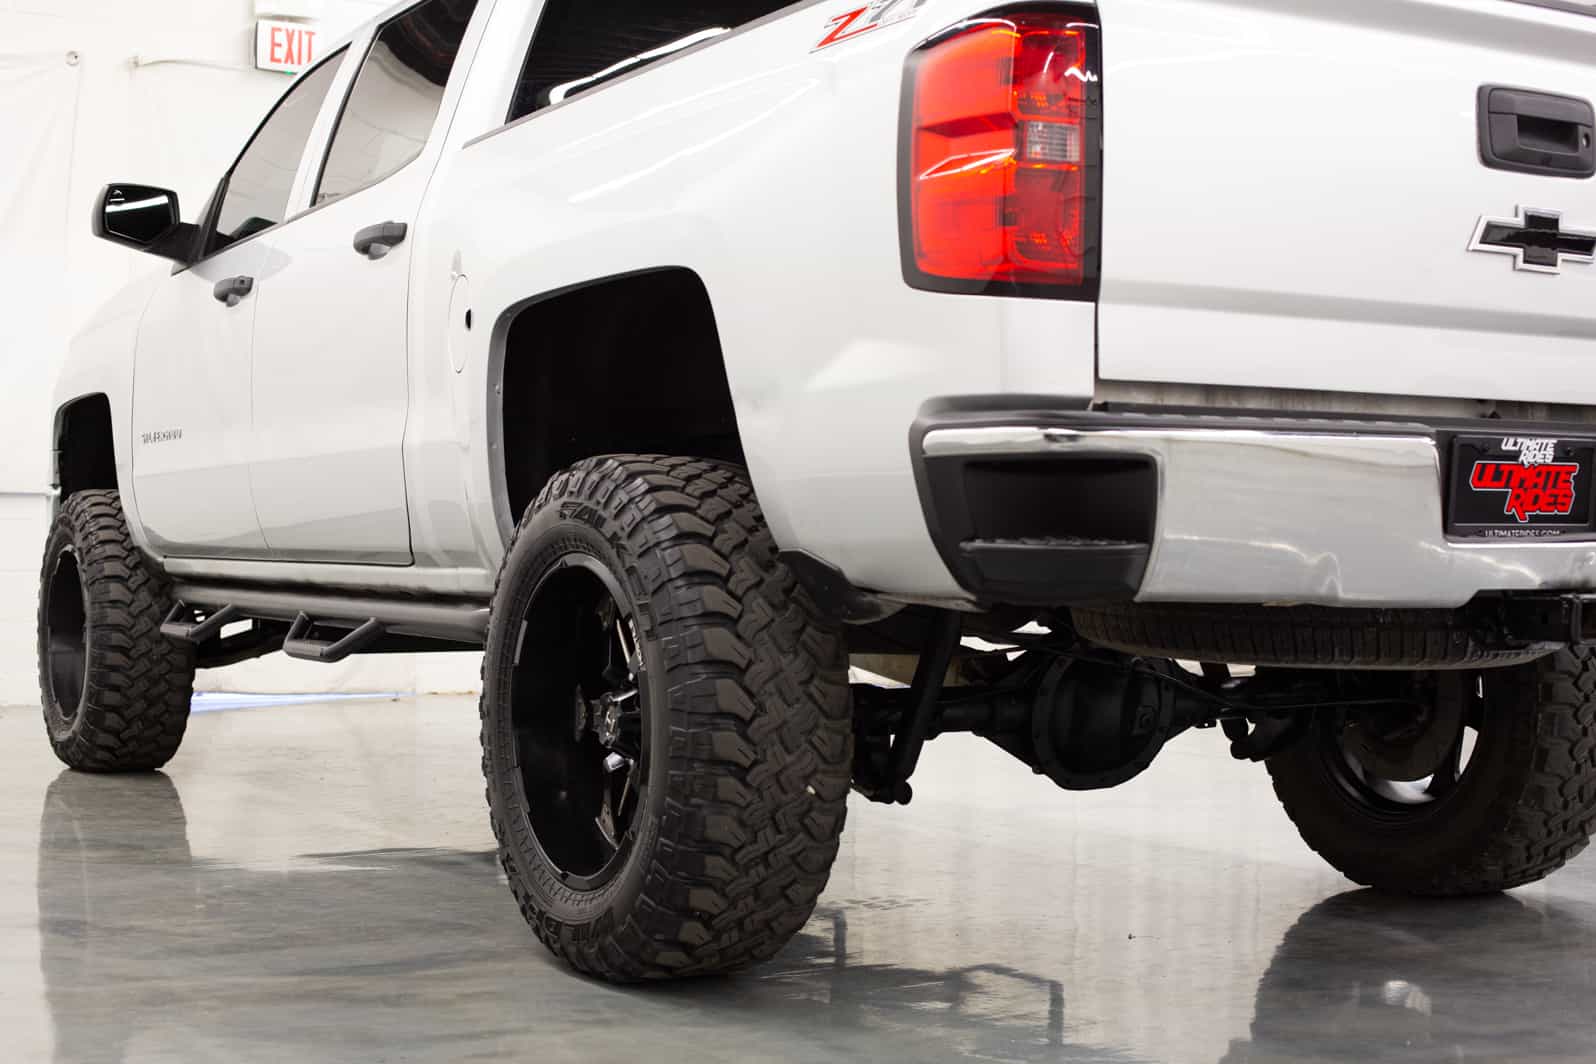 Lifted Chevy Trucks